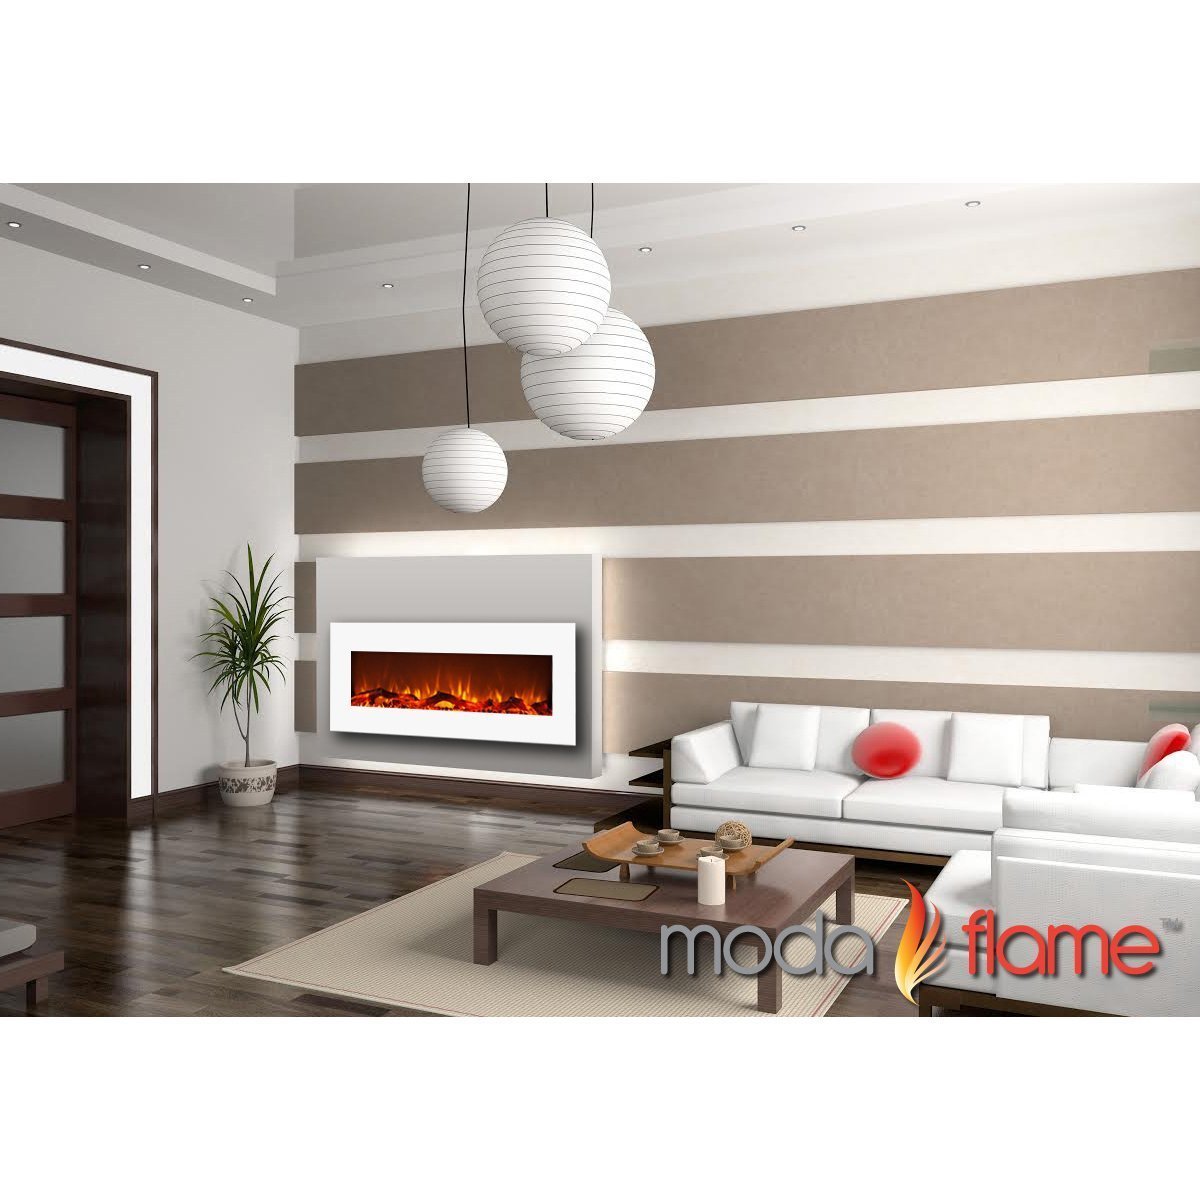 MFE5050WH Houston 50" Electric Wall Mounted Fireplace - White